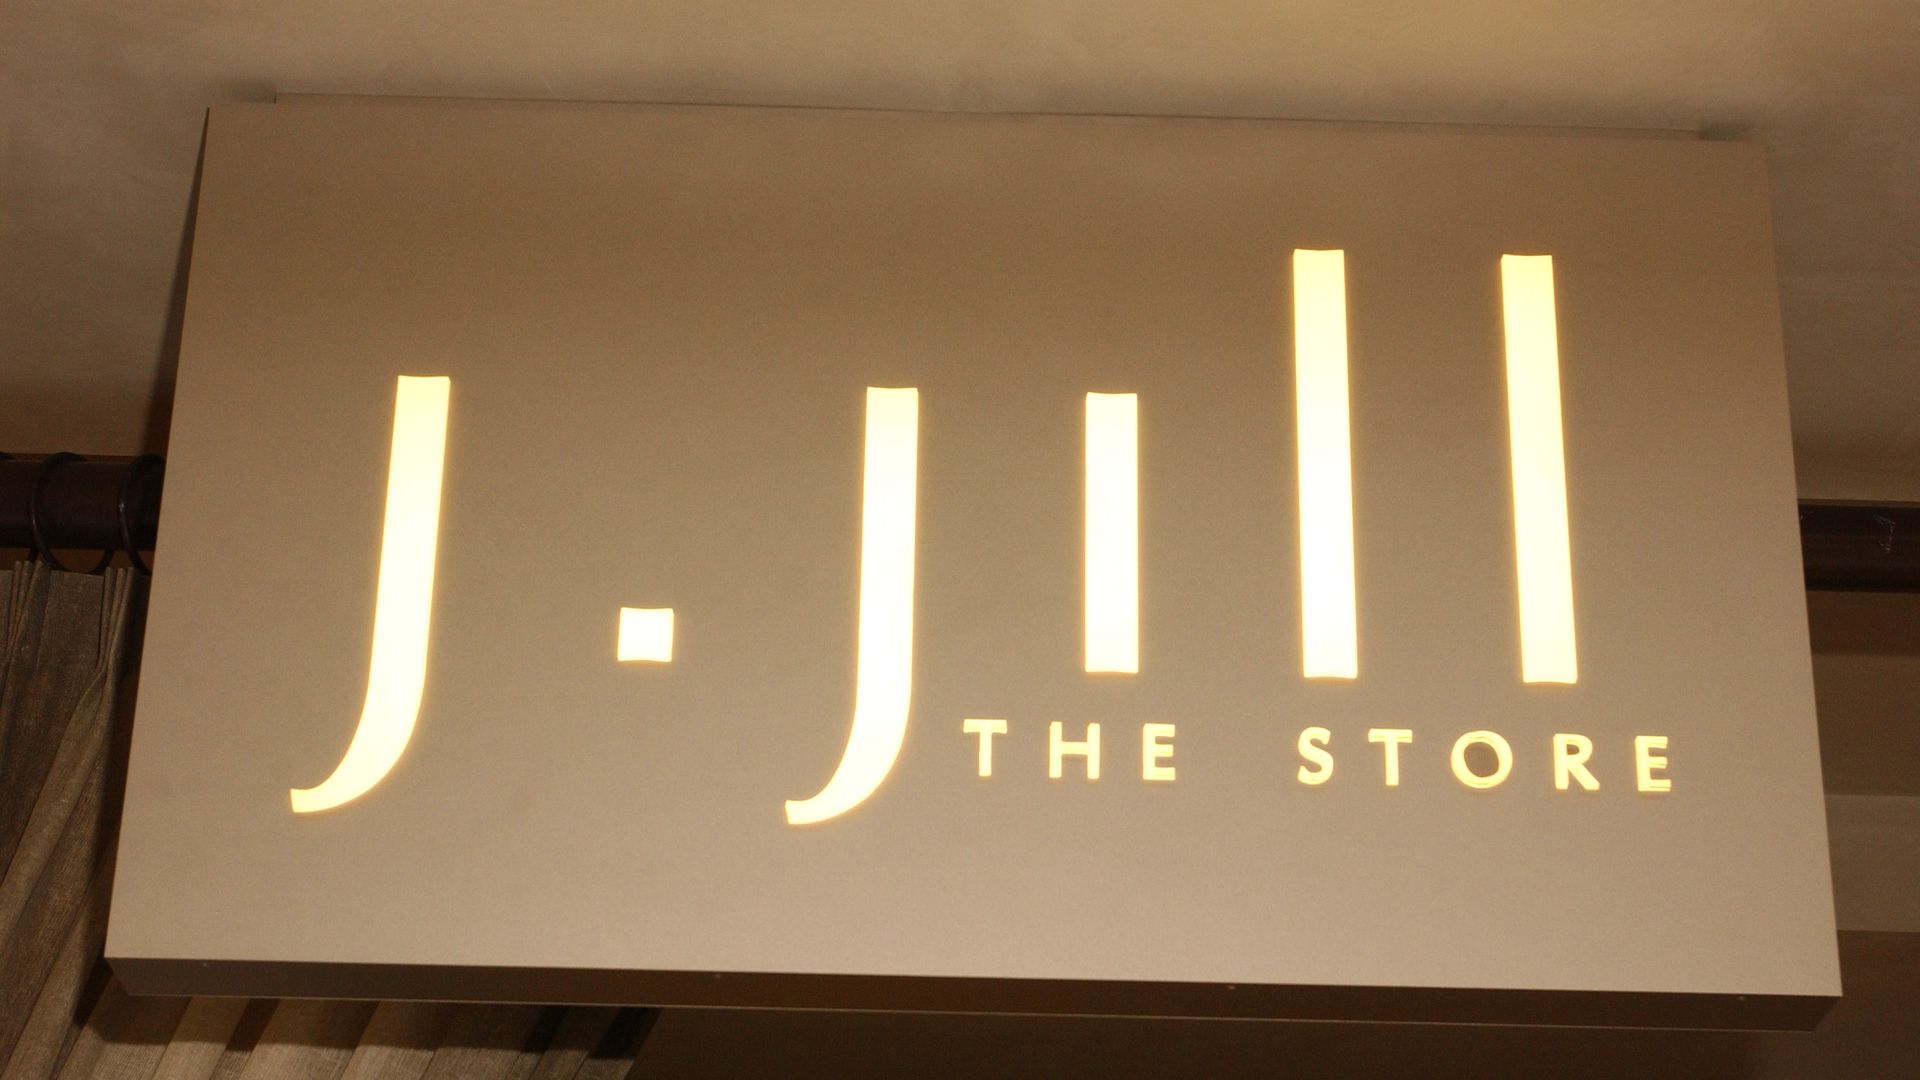 A J.Jill sign in a beige tone hangs on the wall of one of its stores.